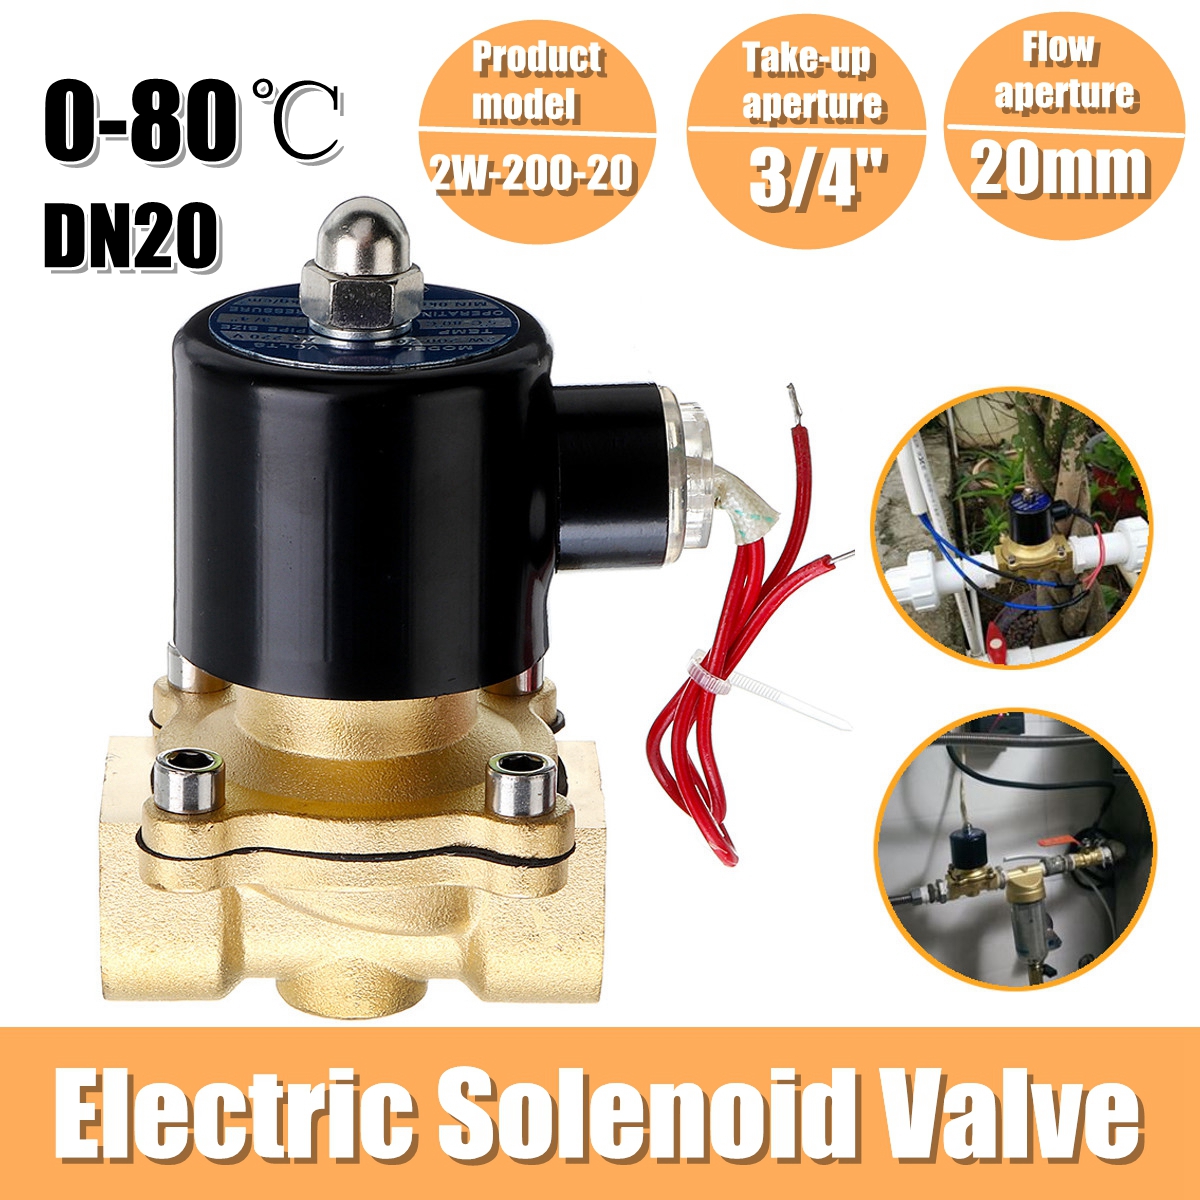 12-34-1-Inch-12V-Electric-Solenoid-Valve-Pneumatic-Valve-for-Water-Air-Gas-Brass-Valve-Air-Valves-1474540-1